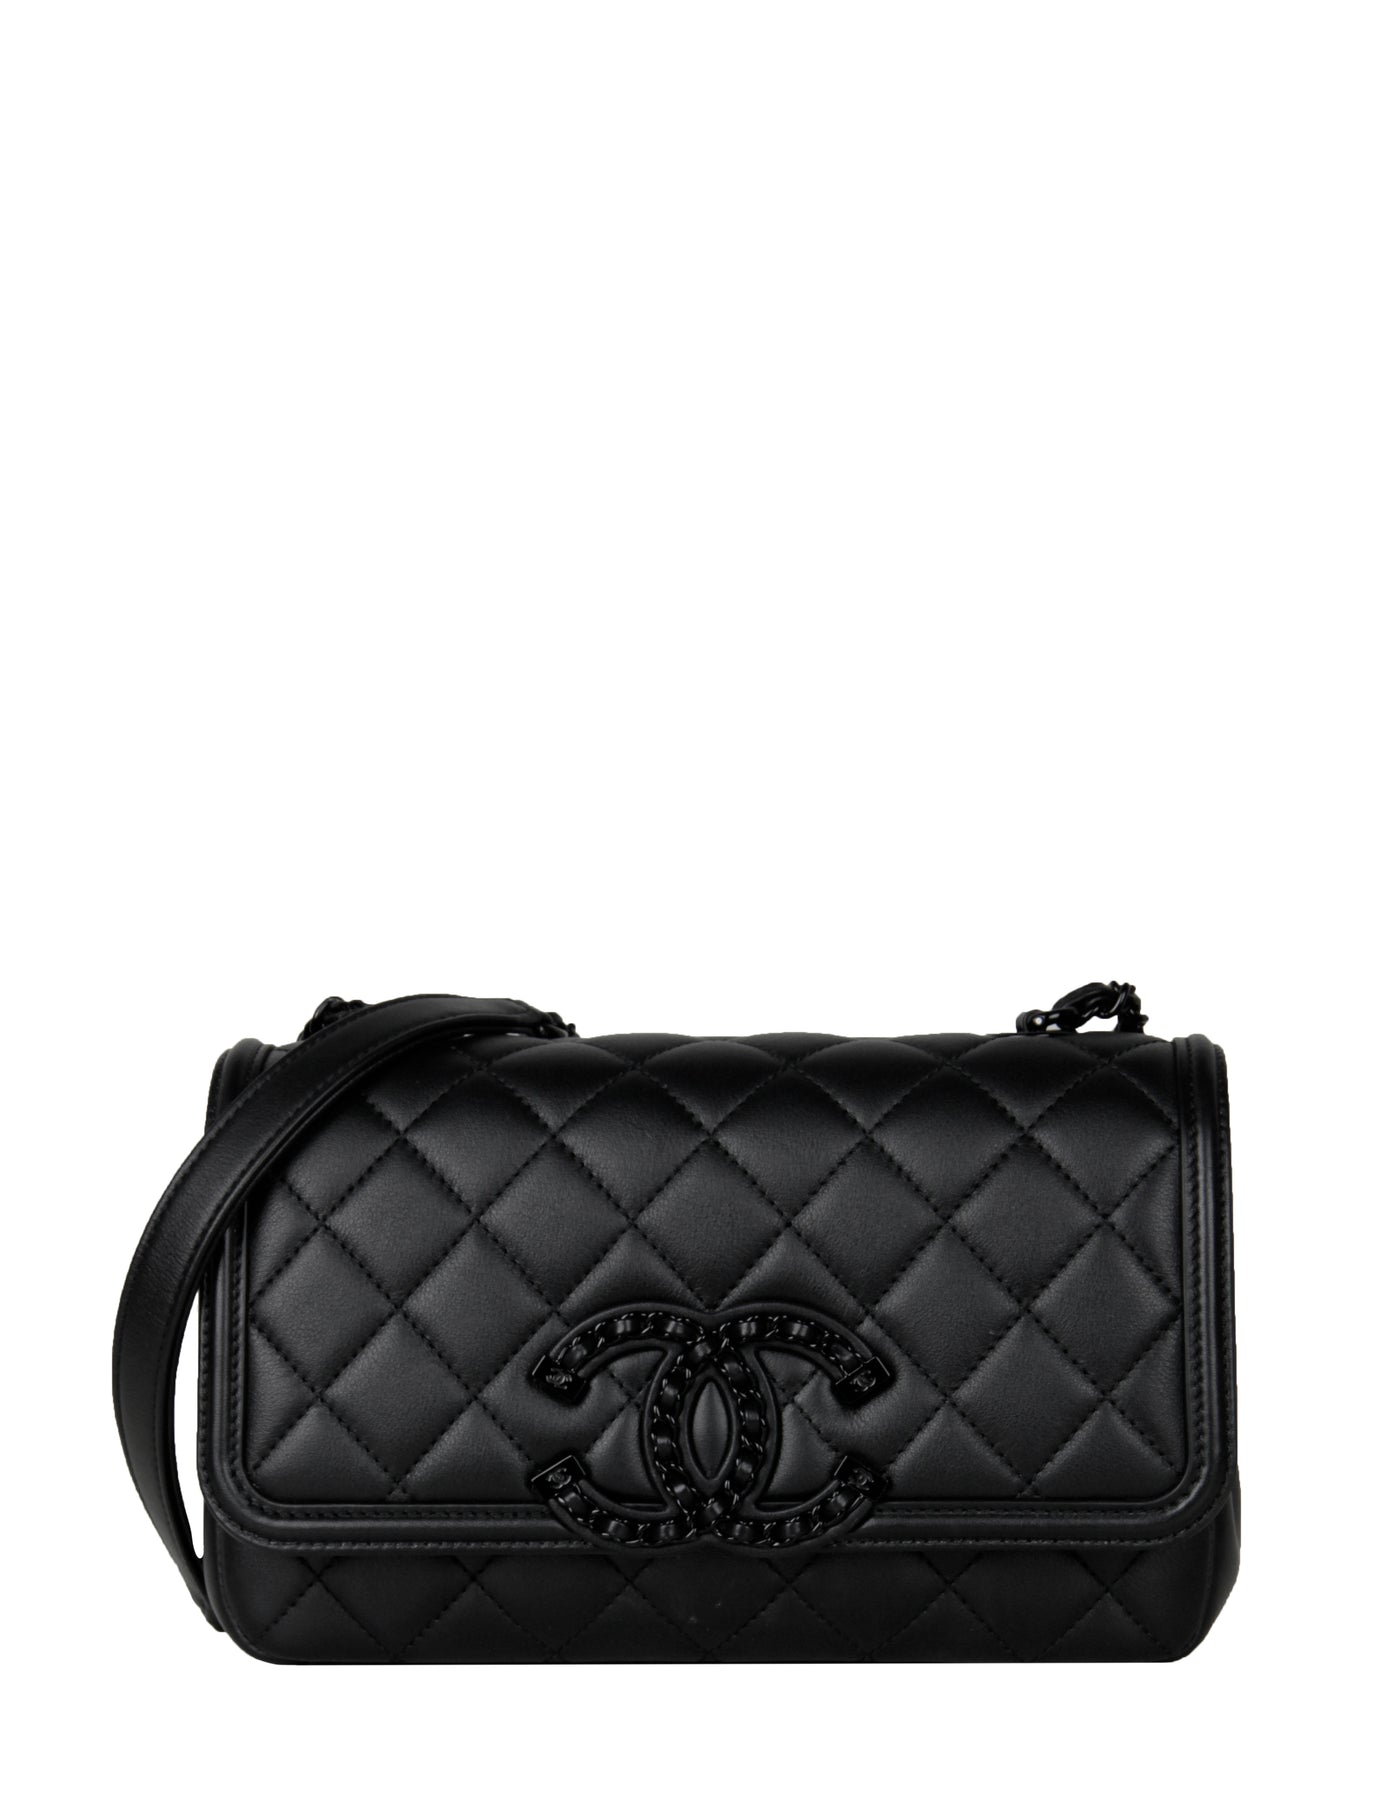 crossbody chanel quilted bag